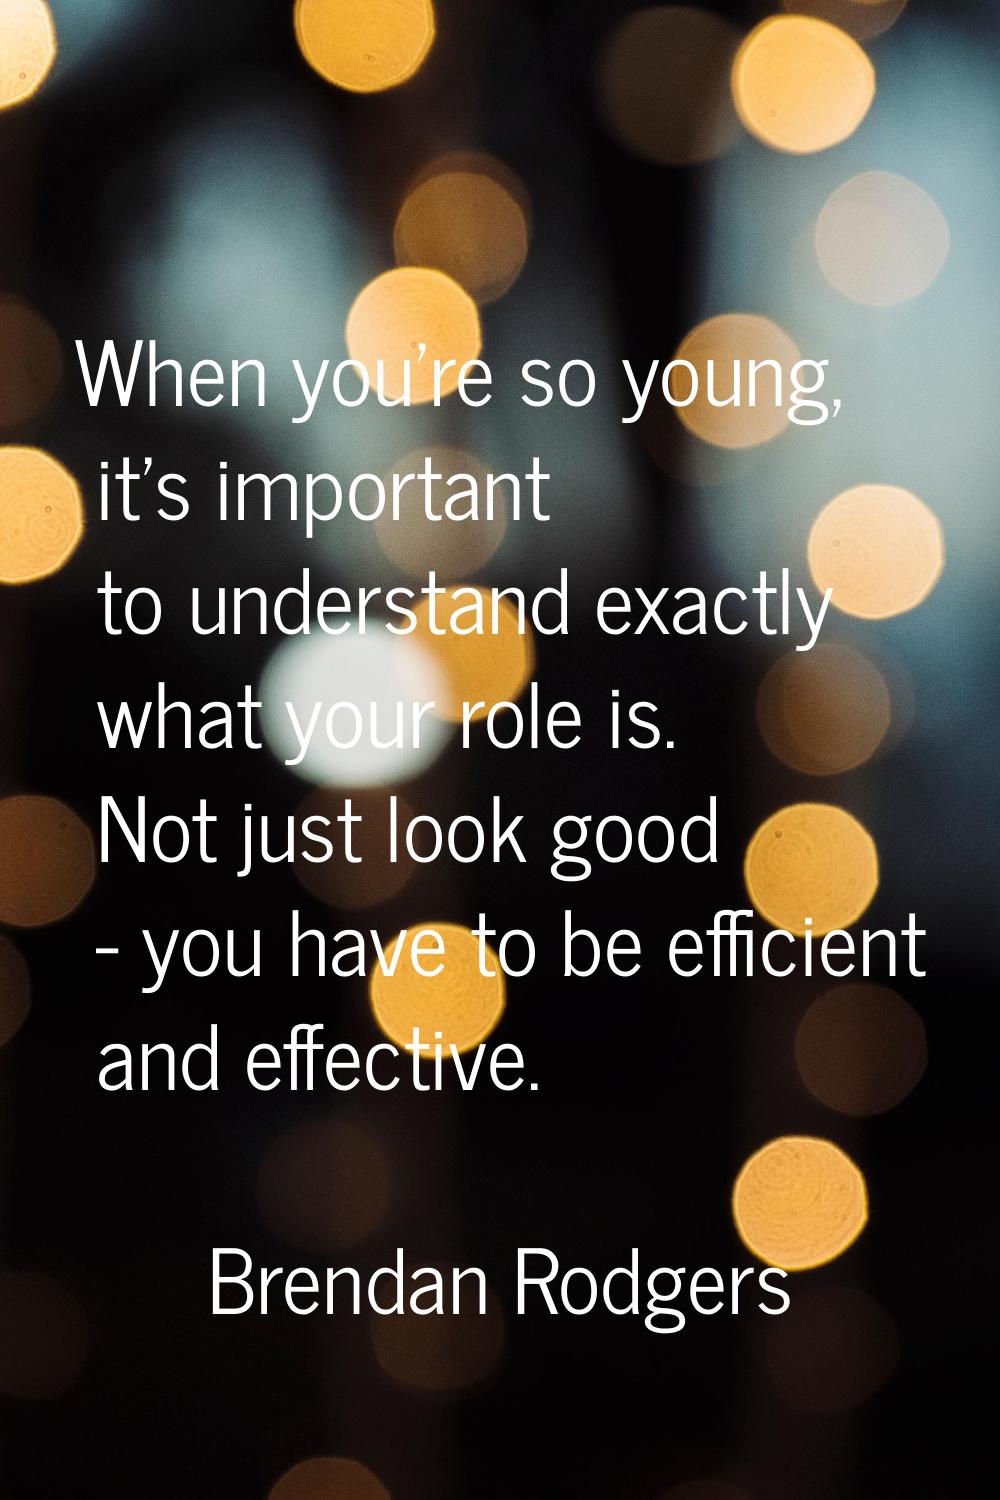 When you're so young, it's important to understand exactly what your role is. Not just look good - 